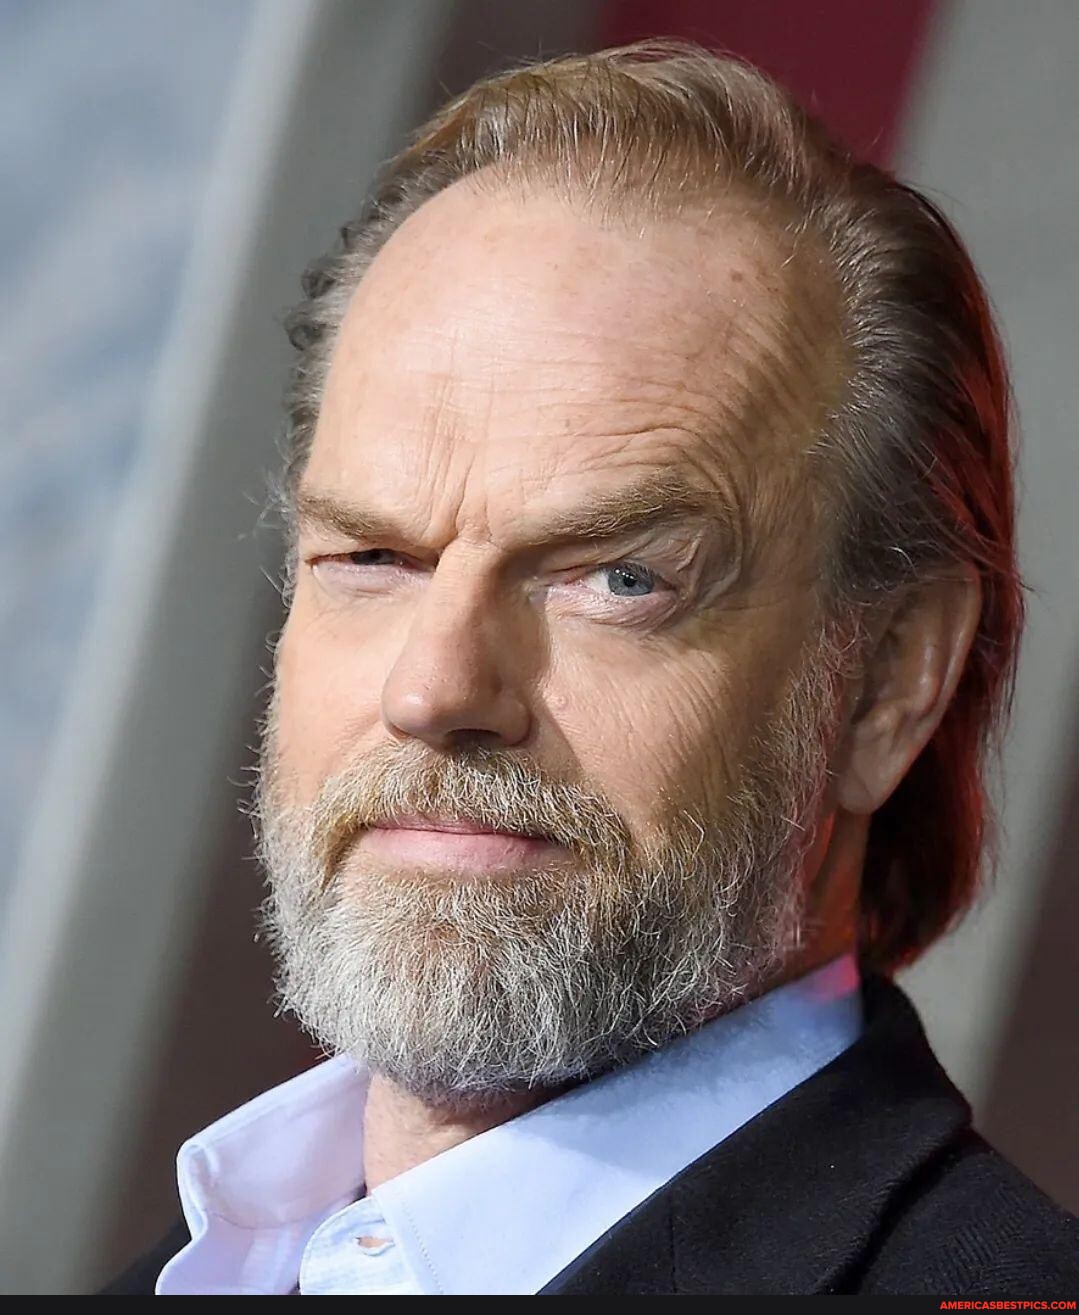 Sci-Fi & Fantasy Fans Society - Happy Birthday Hugo Weaving, who played  Agent Smith in #TheMatrix, #TheMatrixReloaded, #TheMatrixRevoloutions;  Elrond in #TheLordOfTheRings (#TheFellowshipOfTheRing, #TheTwoTowers,  #ReturnOfTheKing) & #TheHobbit